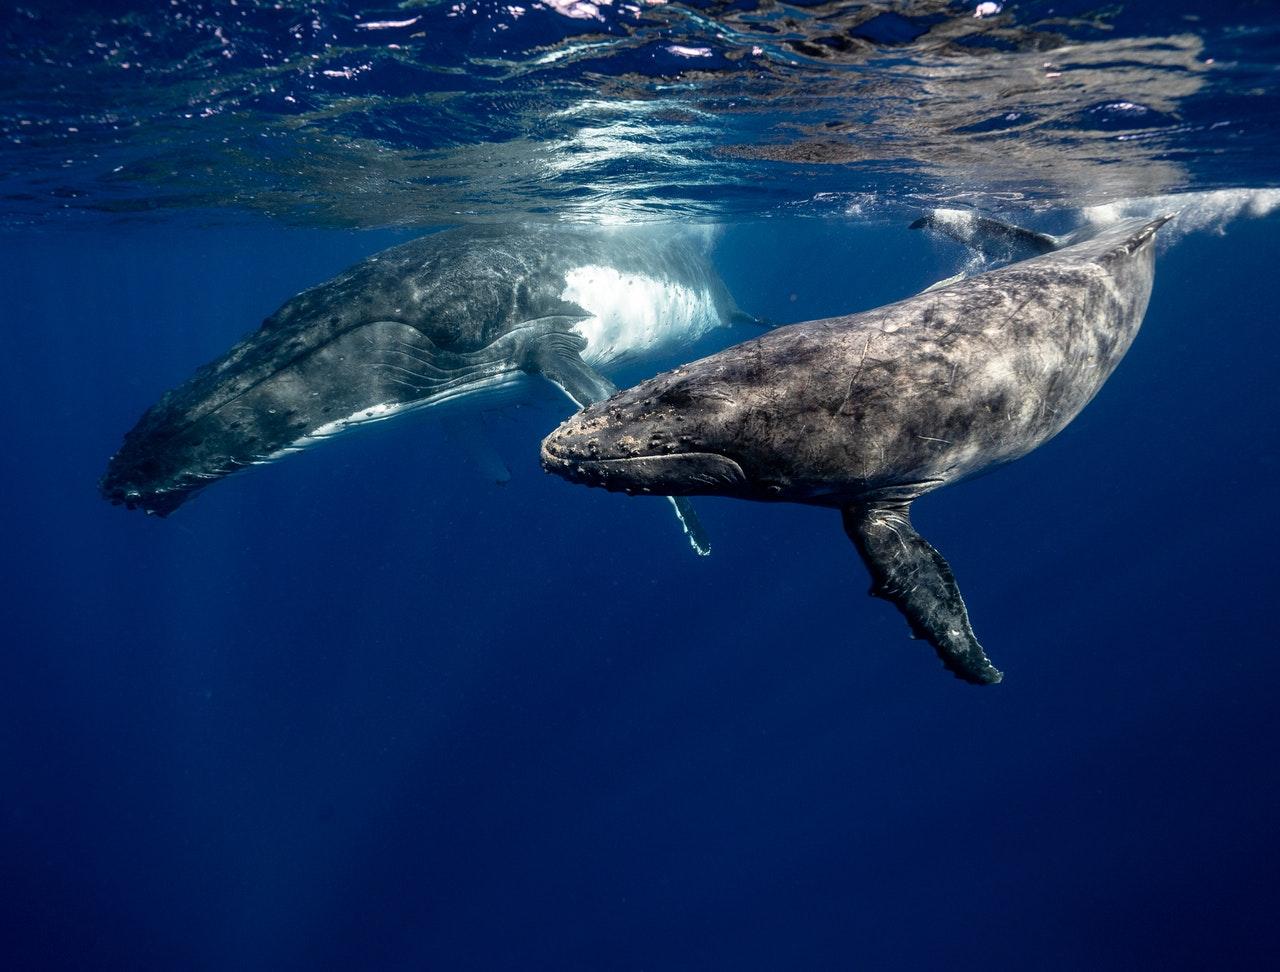 Humpback whales can reach 12-16m in length and weigh up to 30 metric tonnes. Photo: Pexels